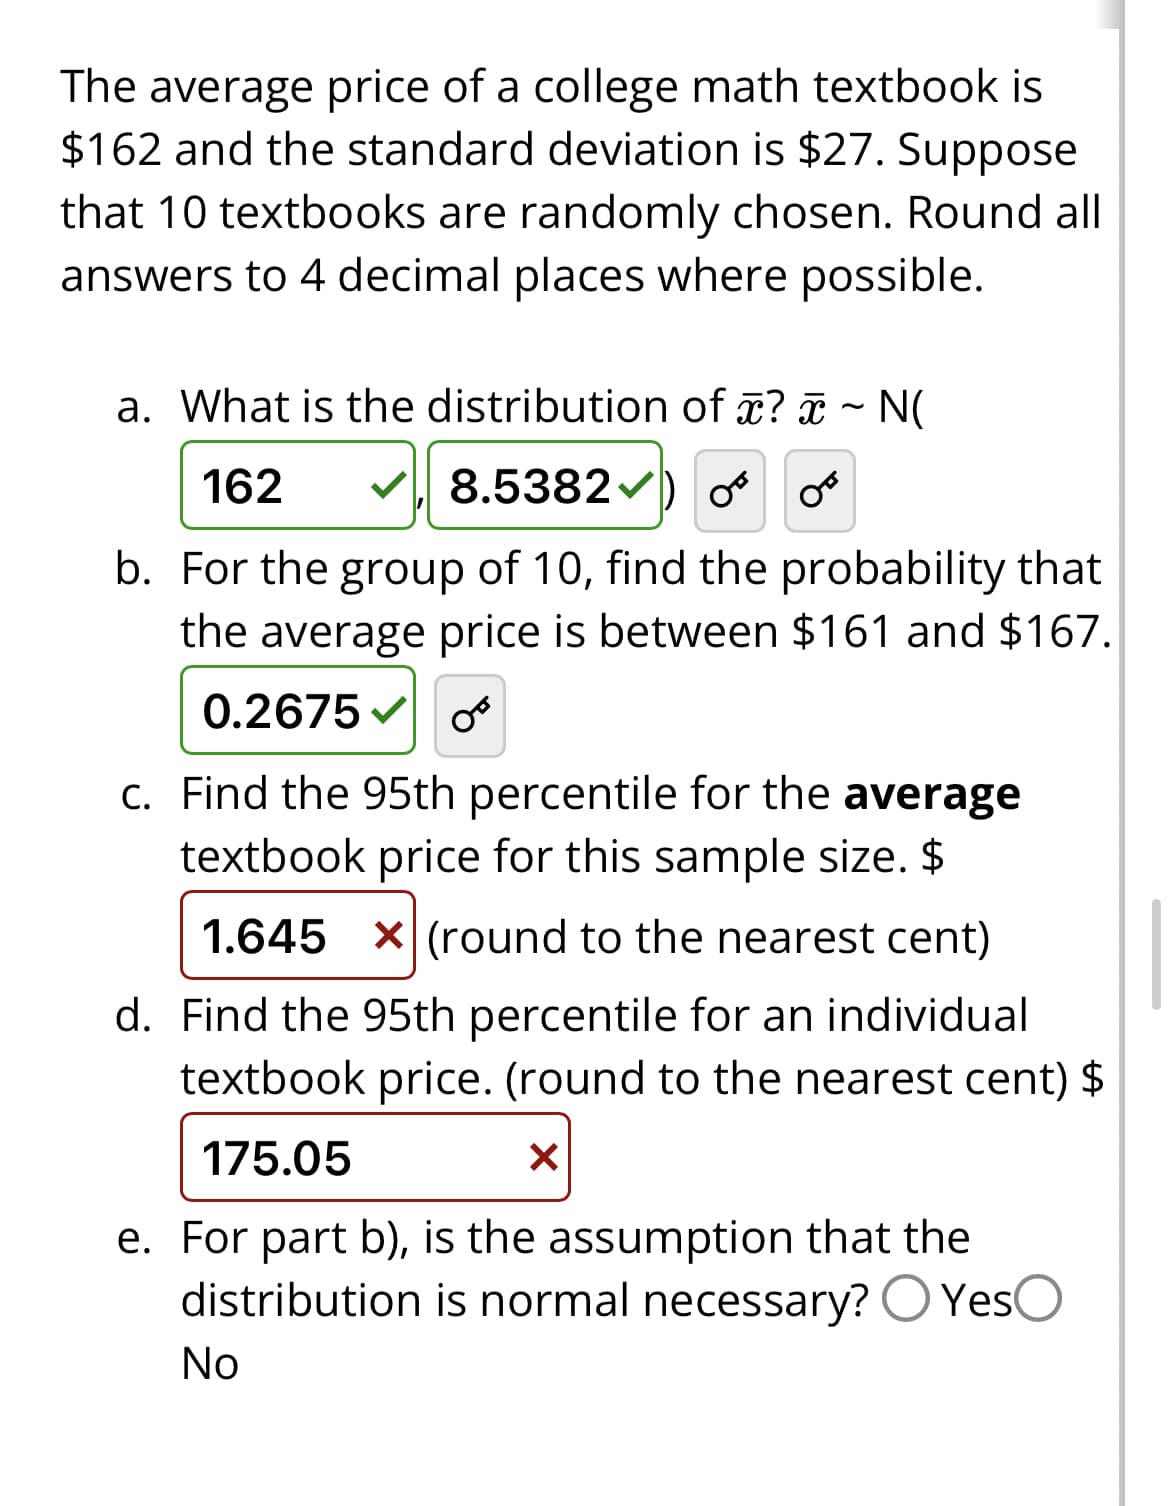 The average price of a college math textbook is
$162 and the standard deviation is $27. Suppose
that 10 textbooks are randomly chosen. Round all
answers to 4 decimal places where possible.
a. What is the distribution of x? ~ N(
✔8.5382✔) OF O
162
b. For the group of 10, find the probability that
the average price is between $161 and $167.
0.2675 OF
c. Find the 95th percentile for the average
textbook price for this sample size. $
1.645 x (round to the nearest cent)
d. Find the 95th percentile for an individual
textbook price. (round to the nearest cent) $
175.05
X
e. For part b), is the assumption that the
distribution is normal necessary? Yes
No